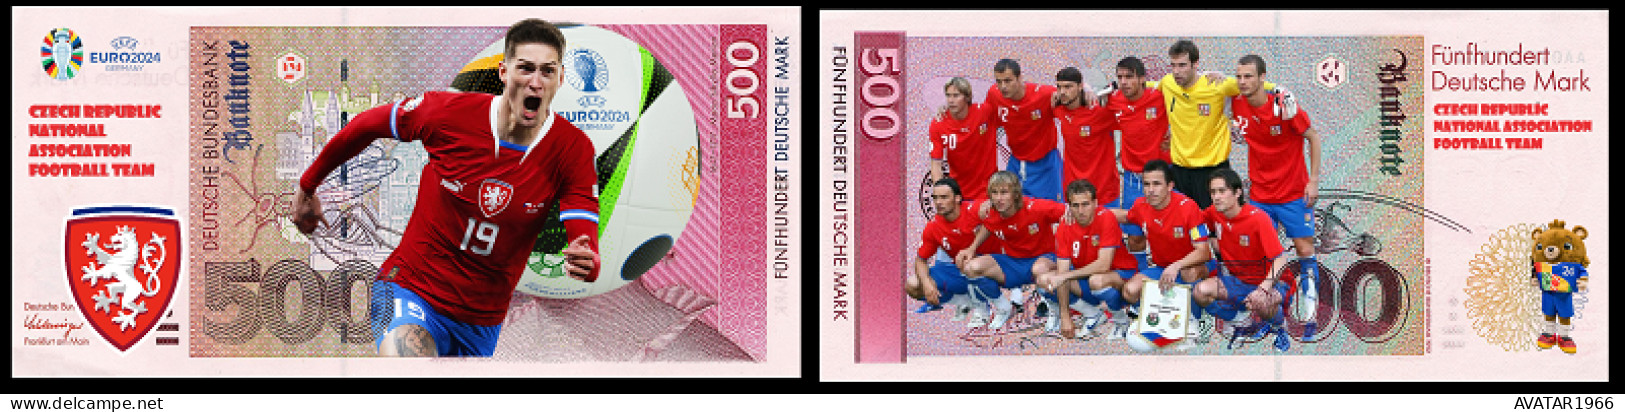 UEFA European Football Championship 2024 qualified country   Czech Republic 8 pieces Germany fantasy paper money